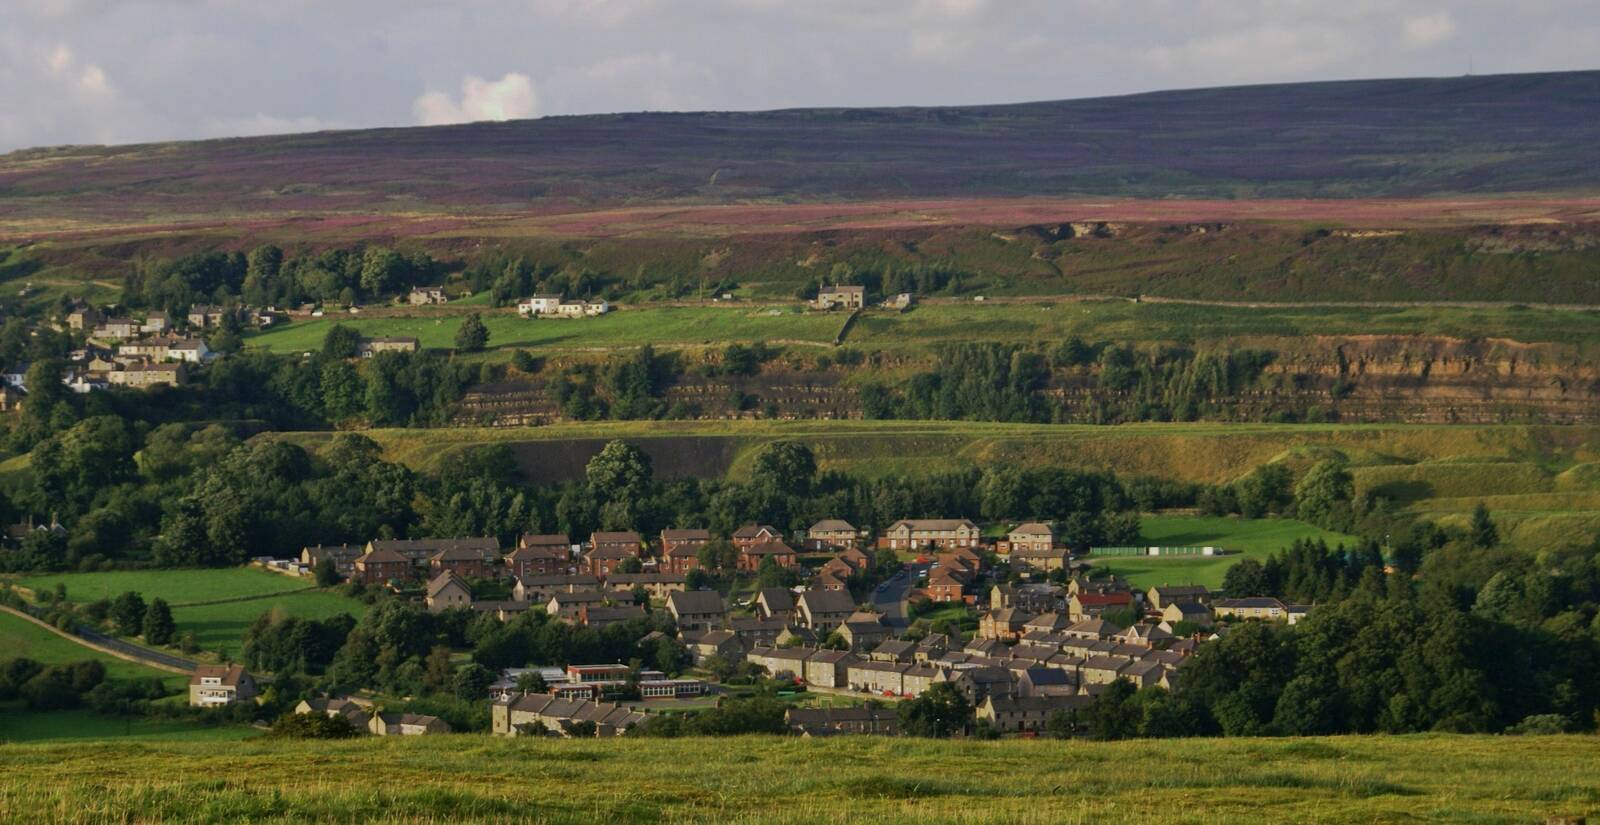 Image of Stanhope, North Pennines by Duncan Mark Wilmot